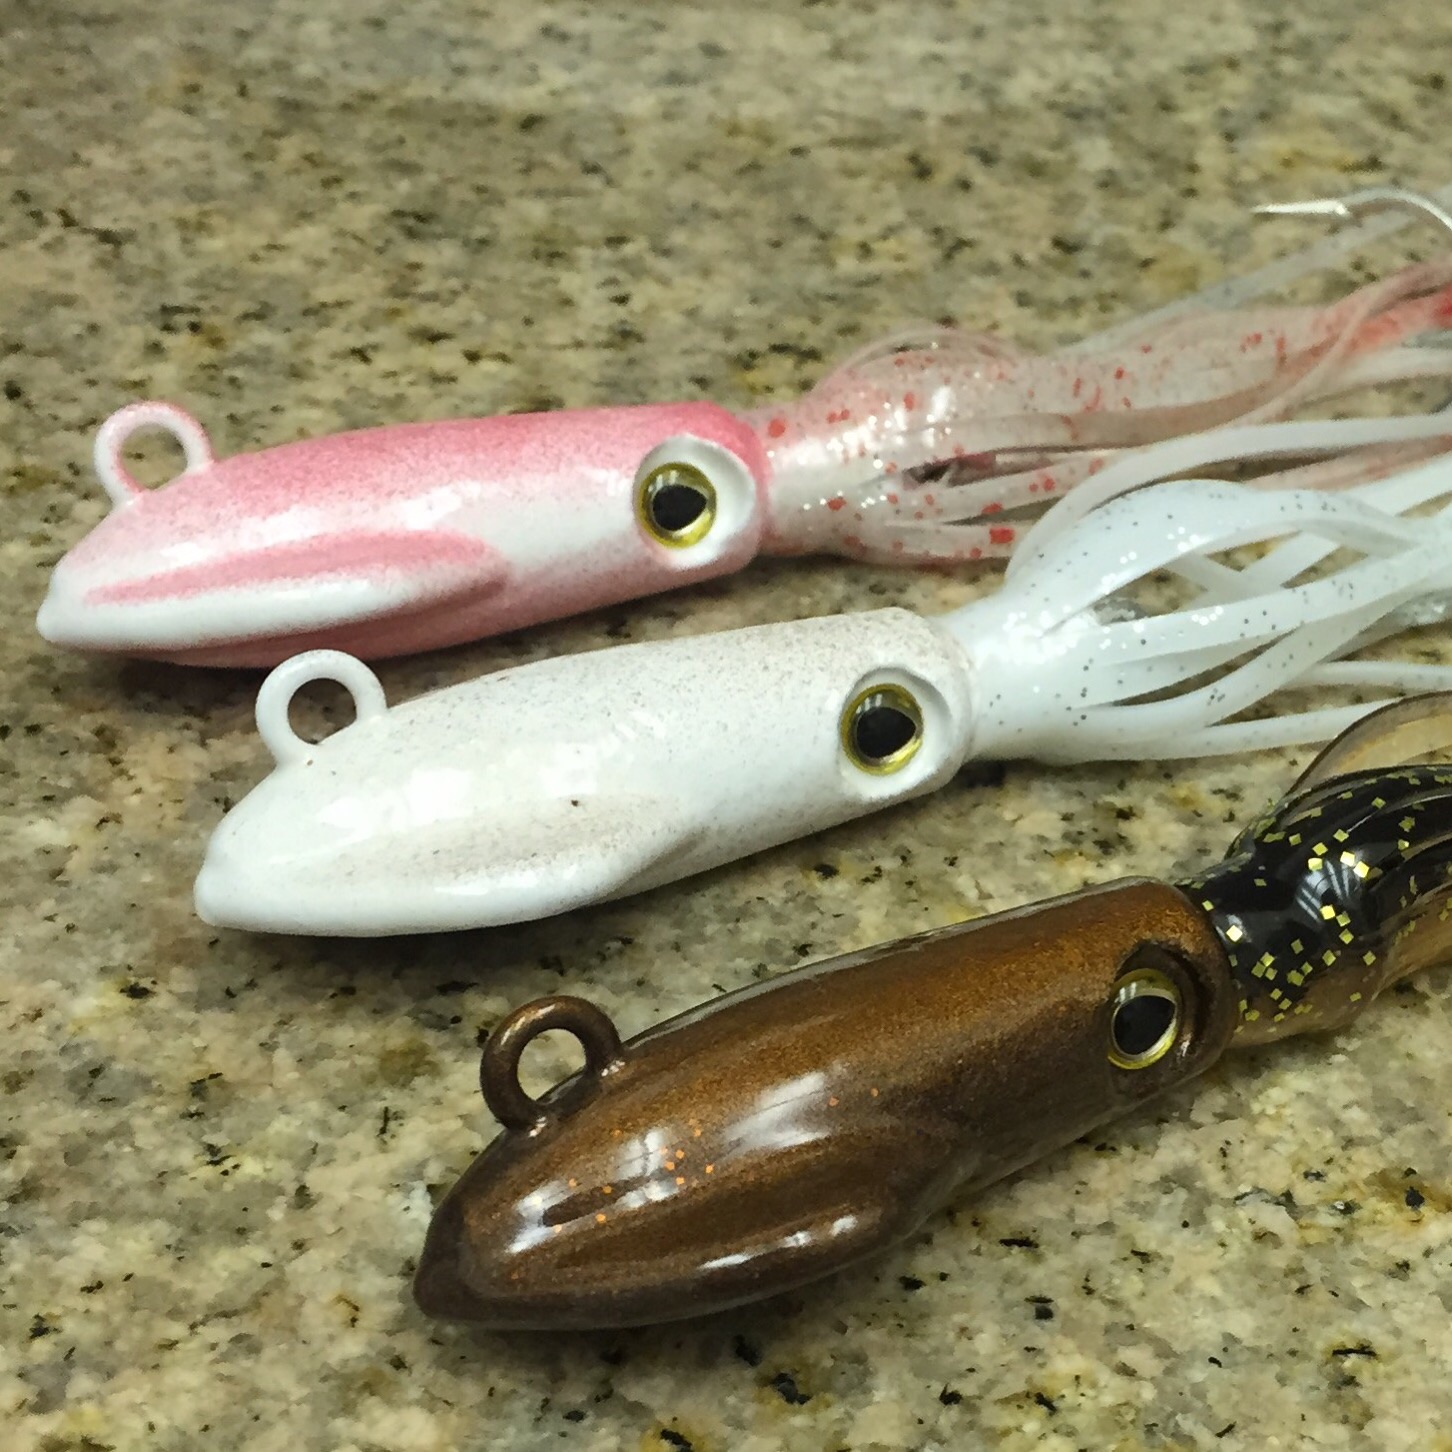 New colors available! squids come in sizes from 2oz up to 32oz! Available in Natural, Glow white, rootbeer